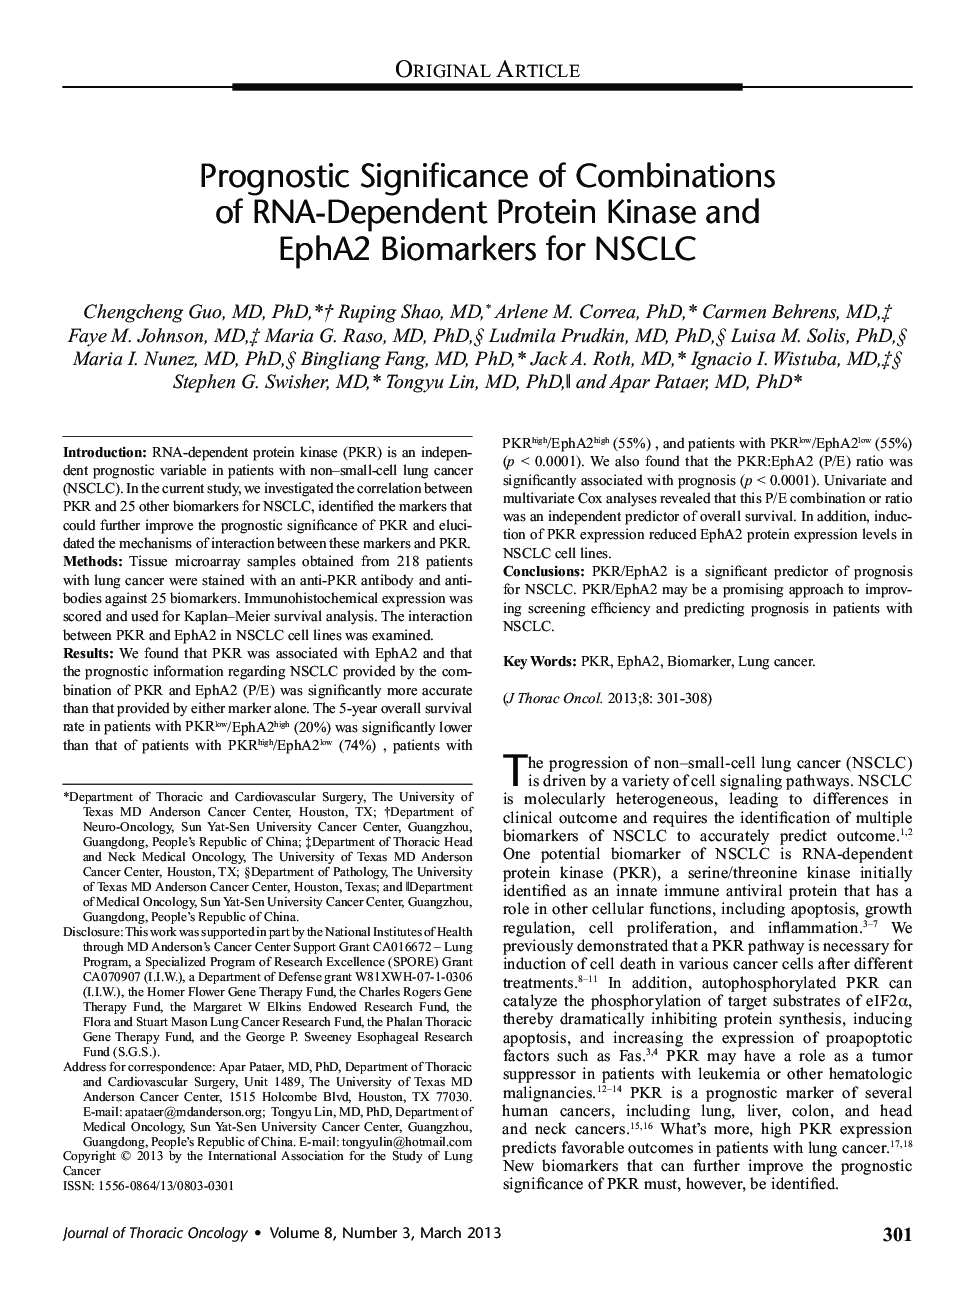 Prognostic Significance of Combinations of RNA-Dependent Protein Kinase and EphA2 Biomarkers for NSCLC 